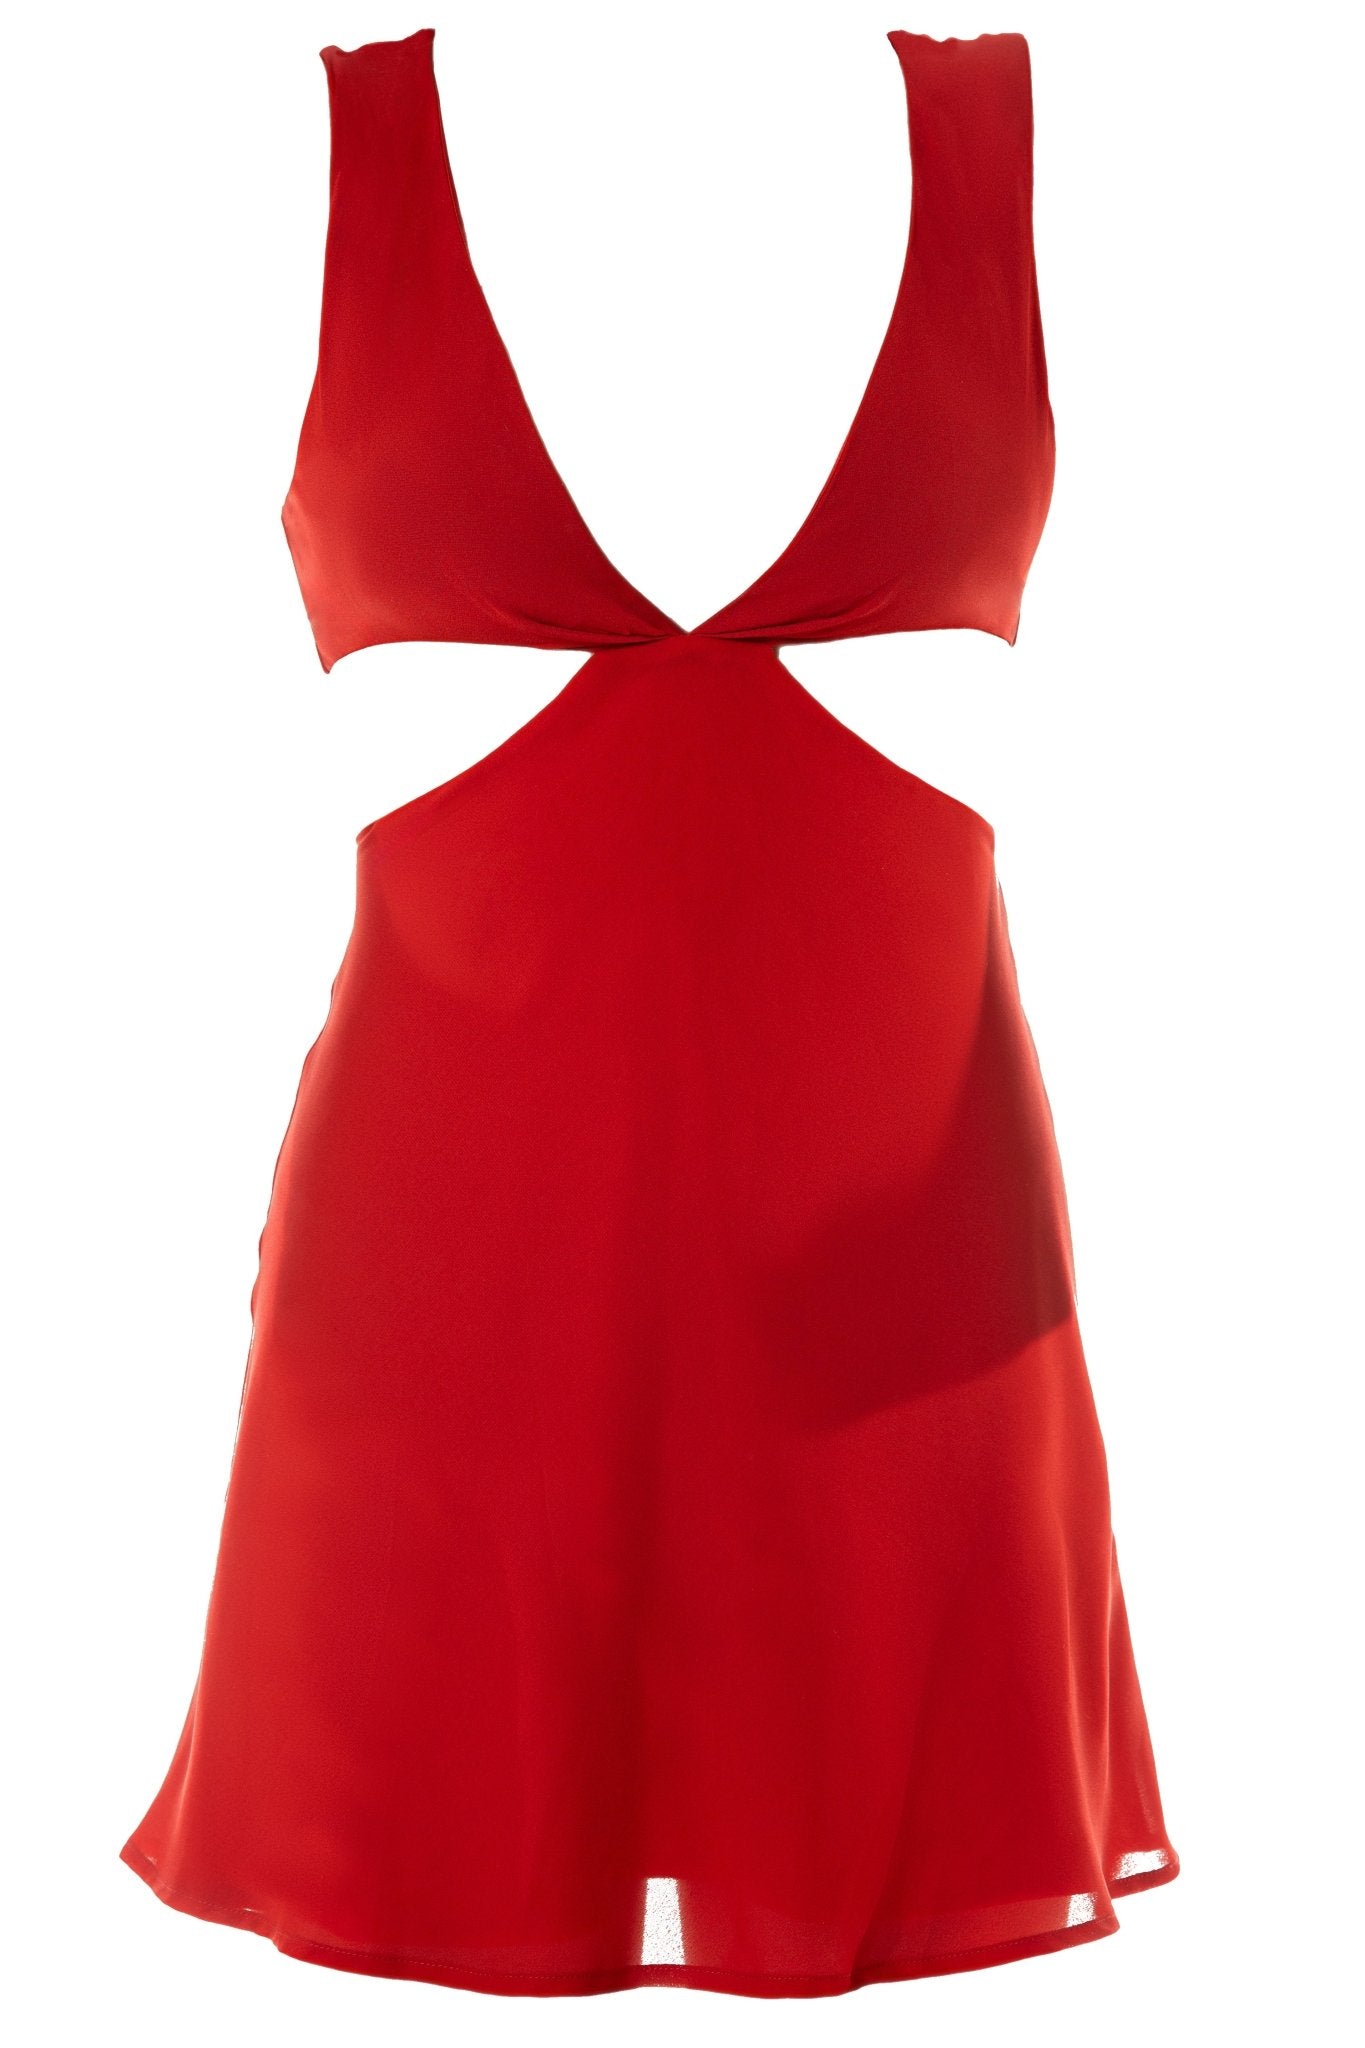 BLAIR Cocktail Dress Uniform for gaming, casino, hotel, restaurants, and resort. Red cut out dress in georgette double layer skirt. - KAPTVA Apparel